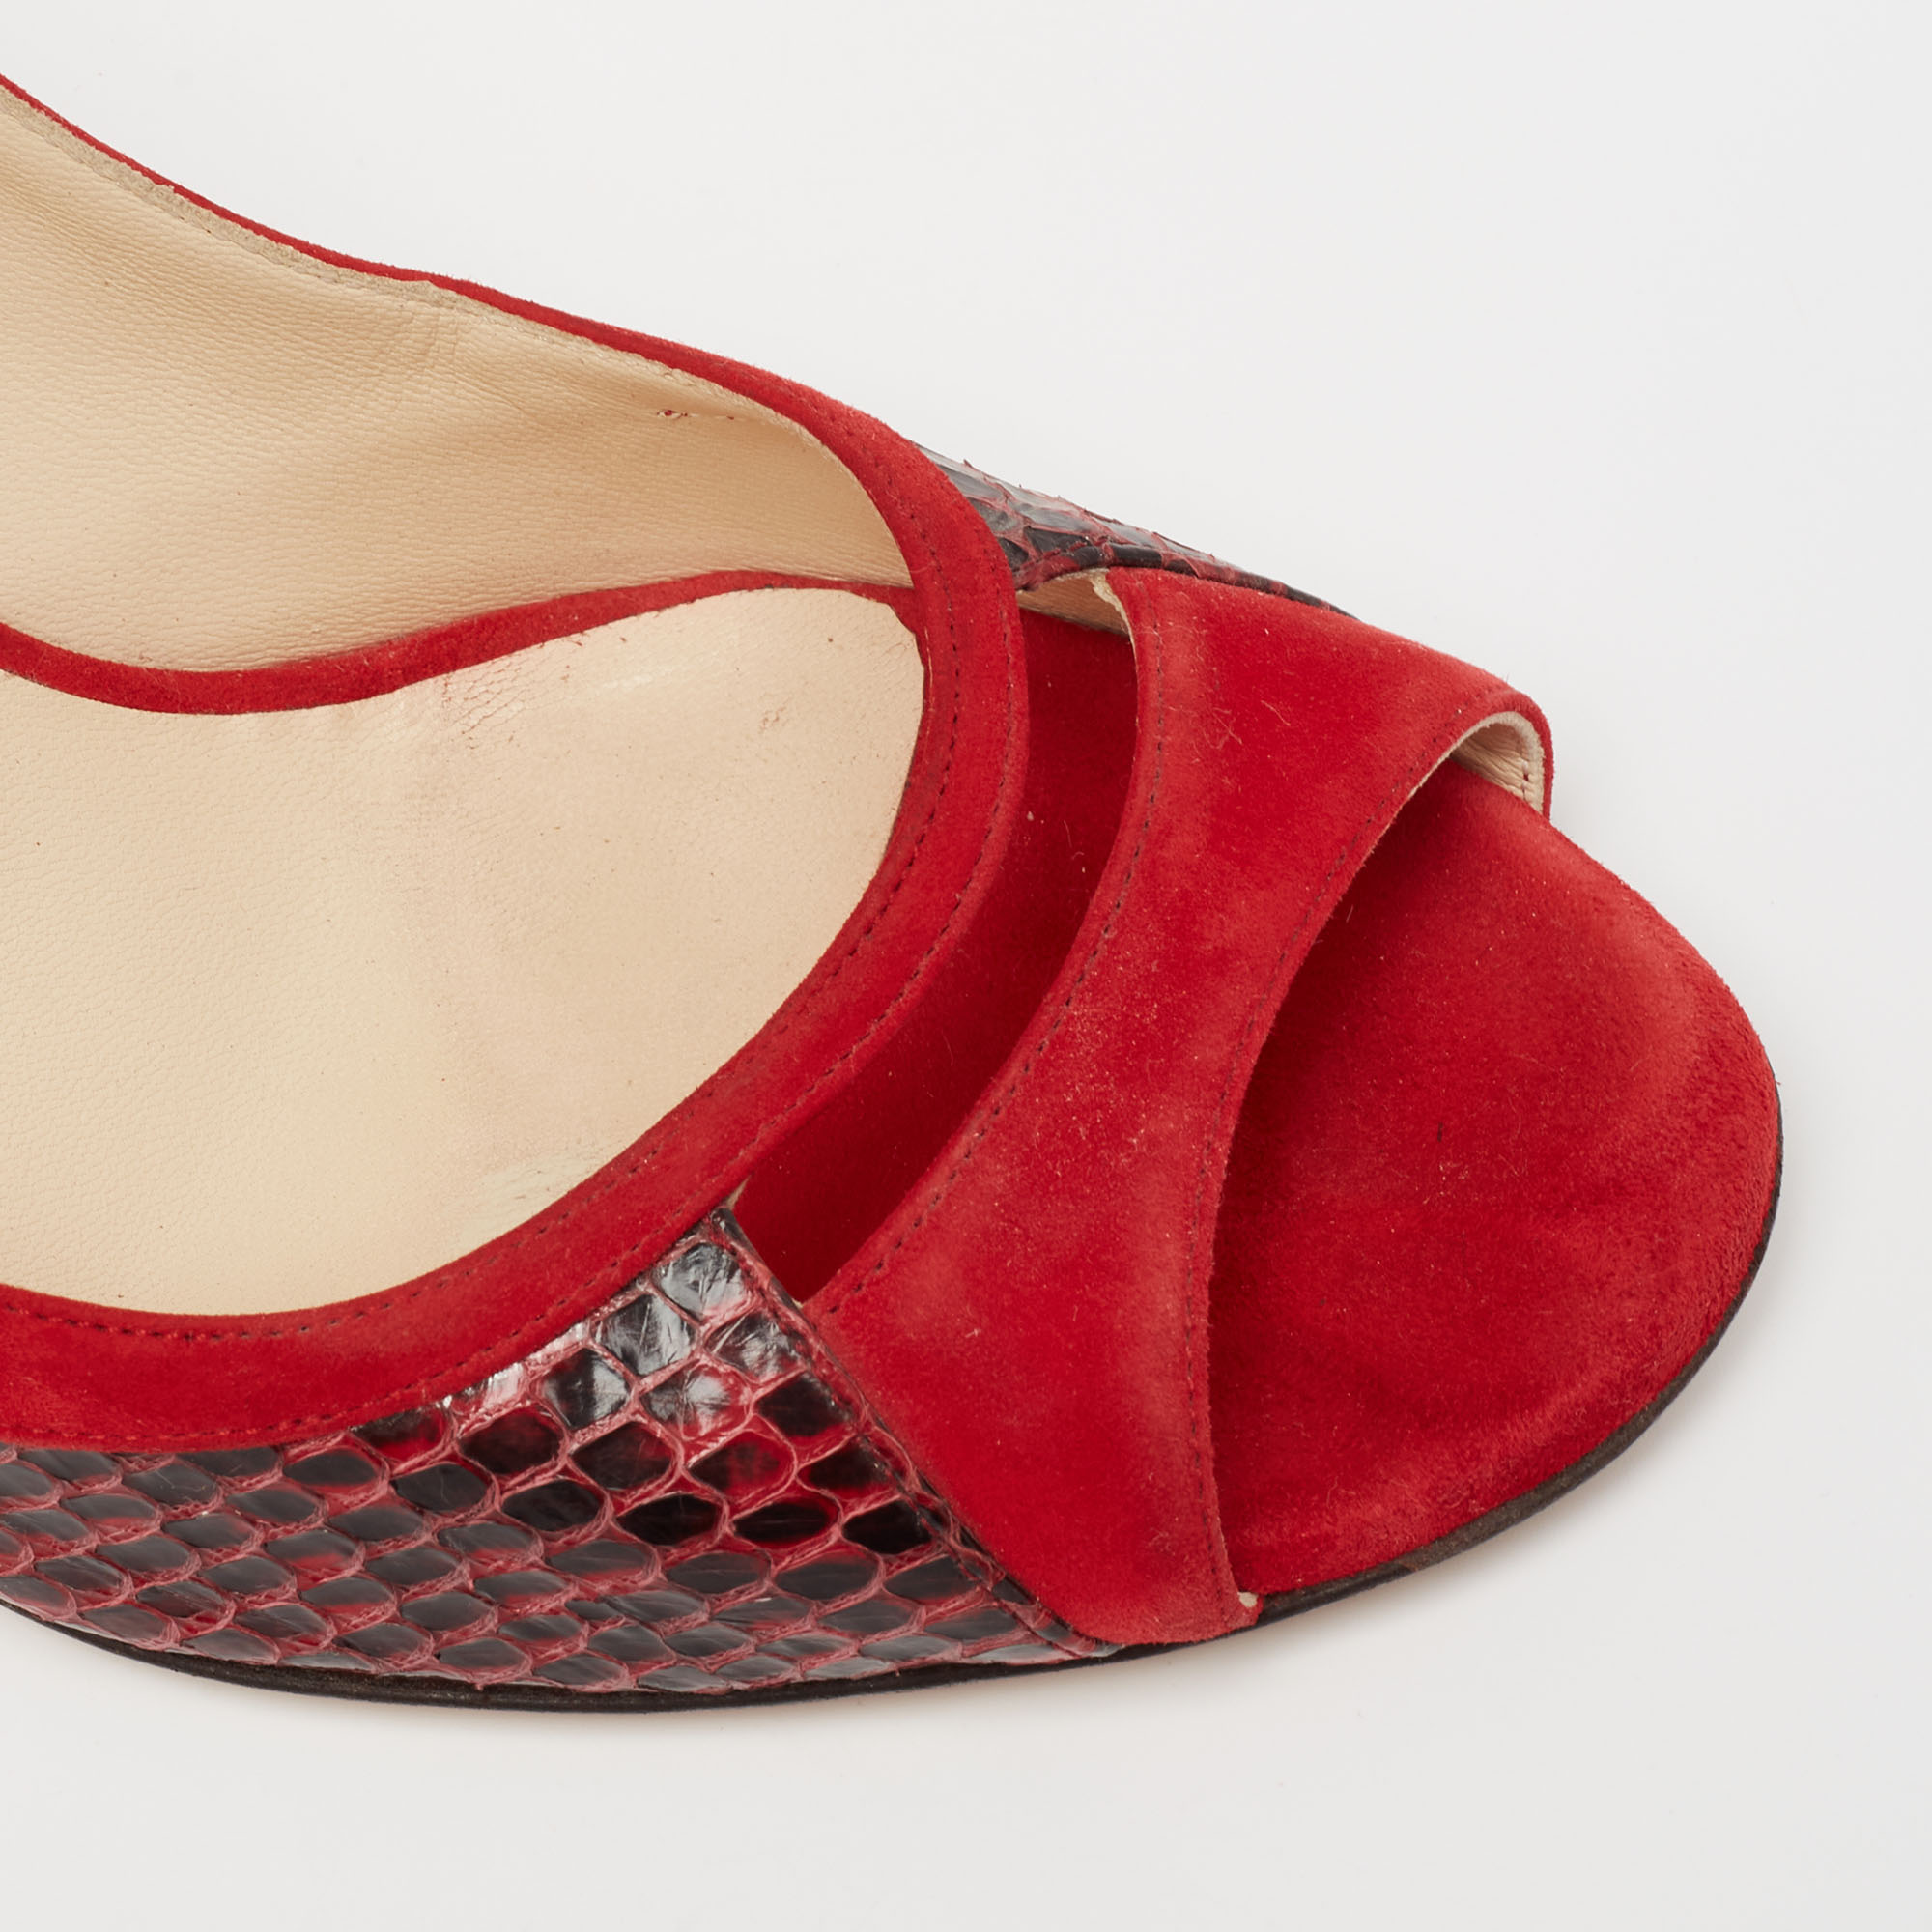 Jimmy Choo Red Suede And Snakeskin Peep Toe Pumps Size 37.5